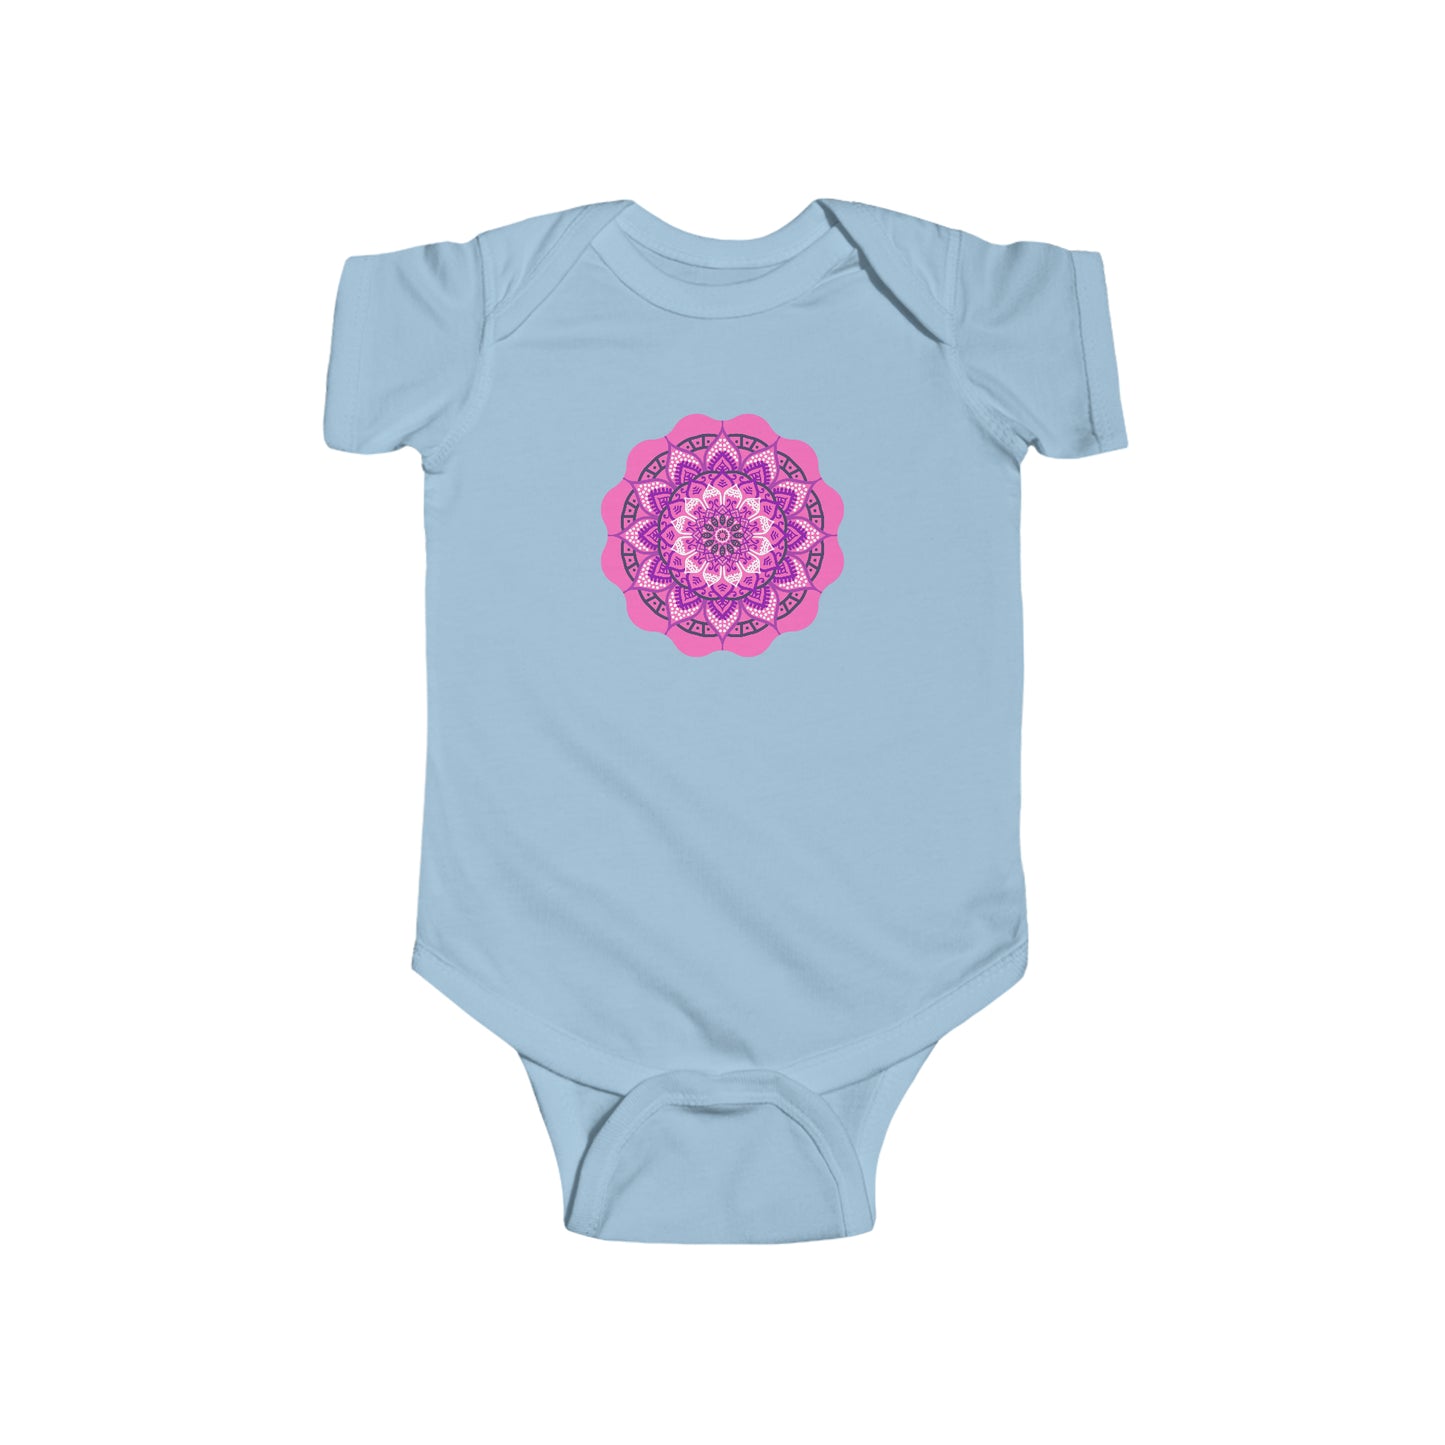 Art, Colorful, Nature, Garden, Flowers- Baby, Infant, Toddler, Soft Cotton, Onesie